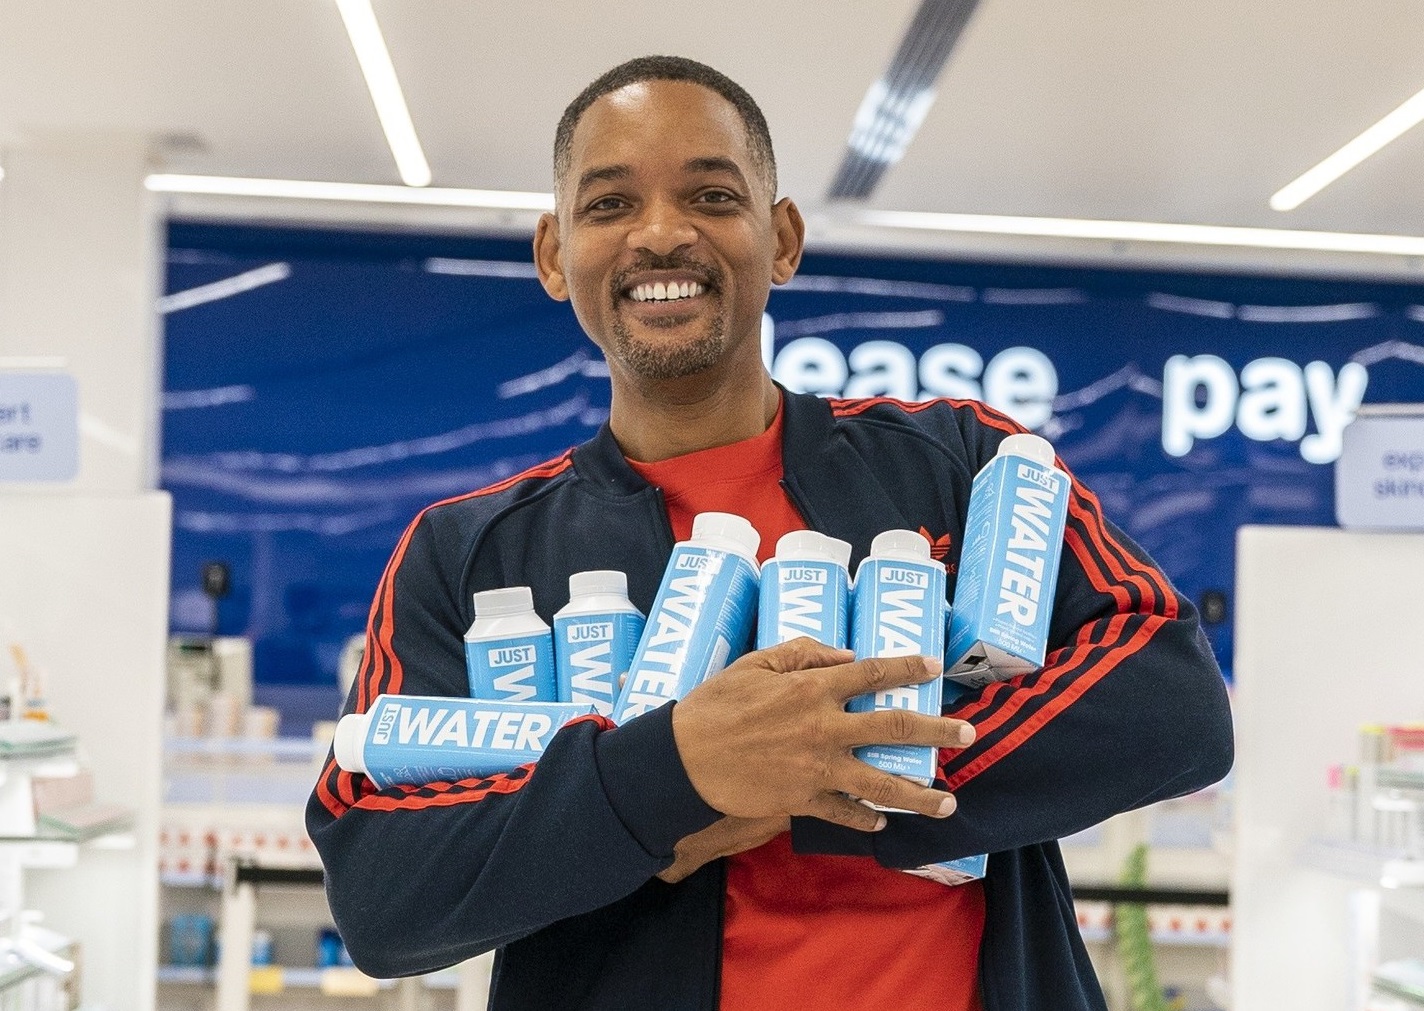 https://www.beveragedaily.com/var/wrbm_gb_food_pharma/storage/images/publications/food-beverage-nutrition/beveragedaily.com/article/2018/08/27/will-smith-launches-just-water-in-the-uk/8540365-1-eng-GB/Will-Smith-launches-Just-Water-in-the-UK.jpg